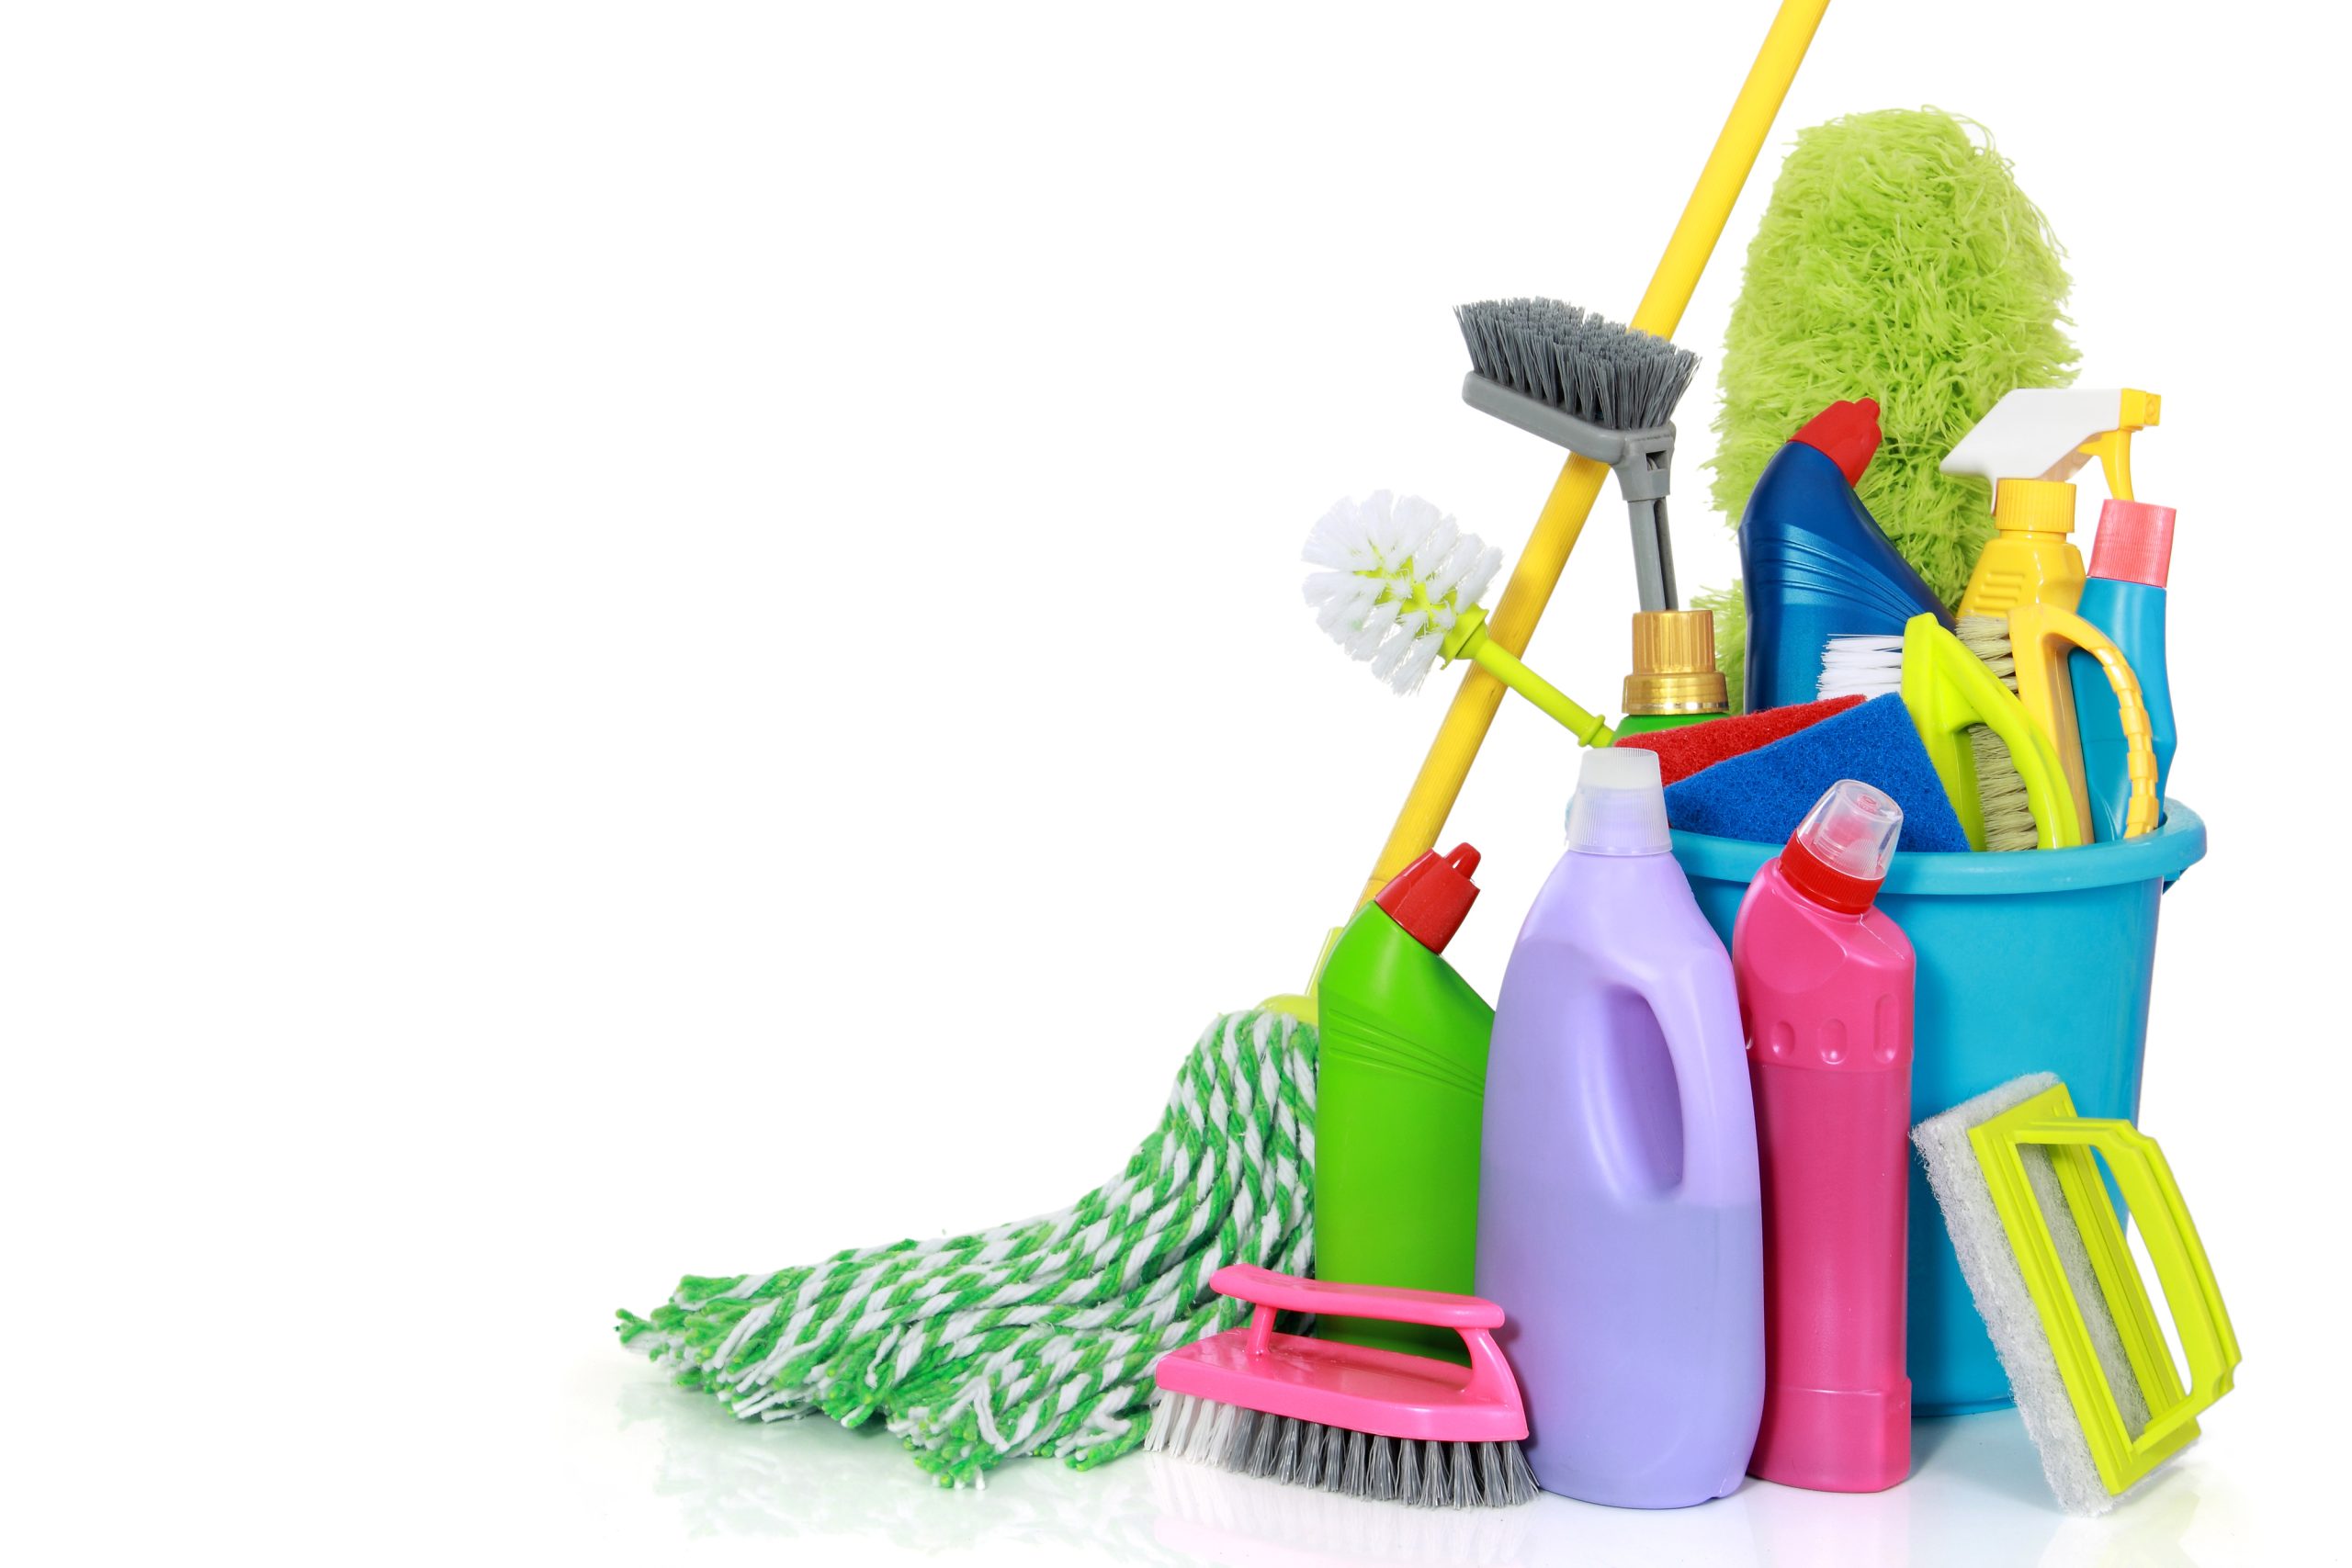 Do I need to provide the cleaning supplies during my house cleaning service?